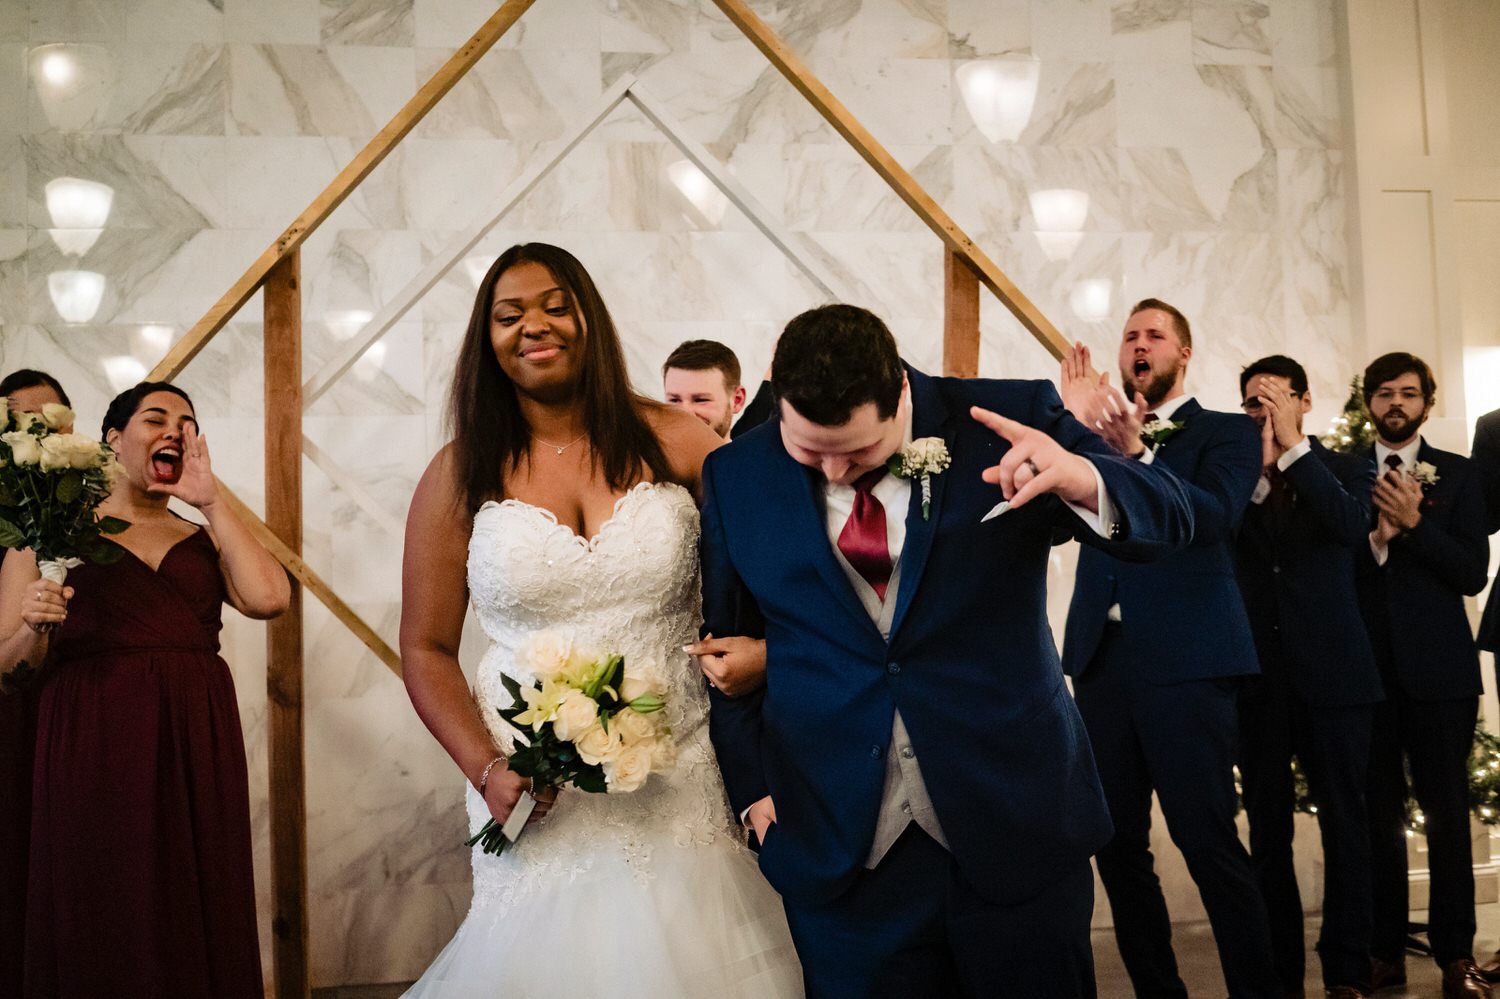 A colorful, candid picture of a bride and groom doing a little bow at the end of their wedding ceremony, as their wedding party clap and shout enthusiastically in the background on their rainy winter wedding day at The Station in Kansas City. 